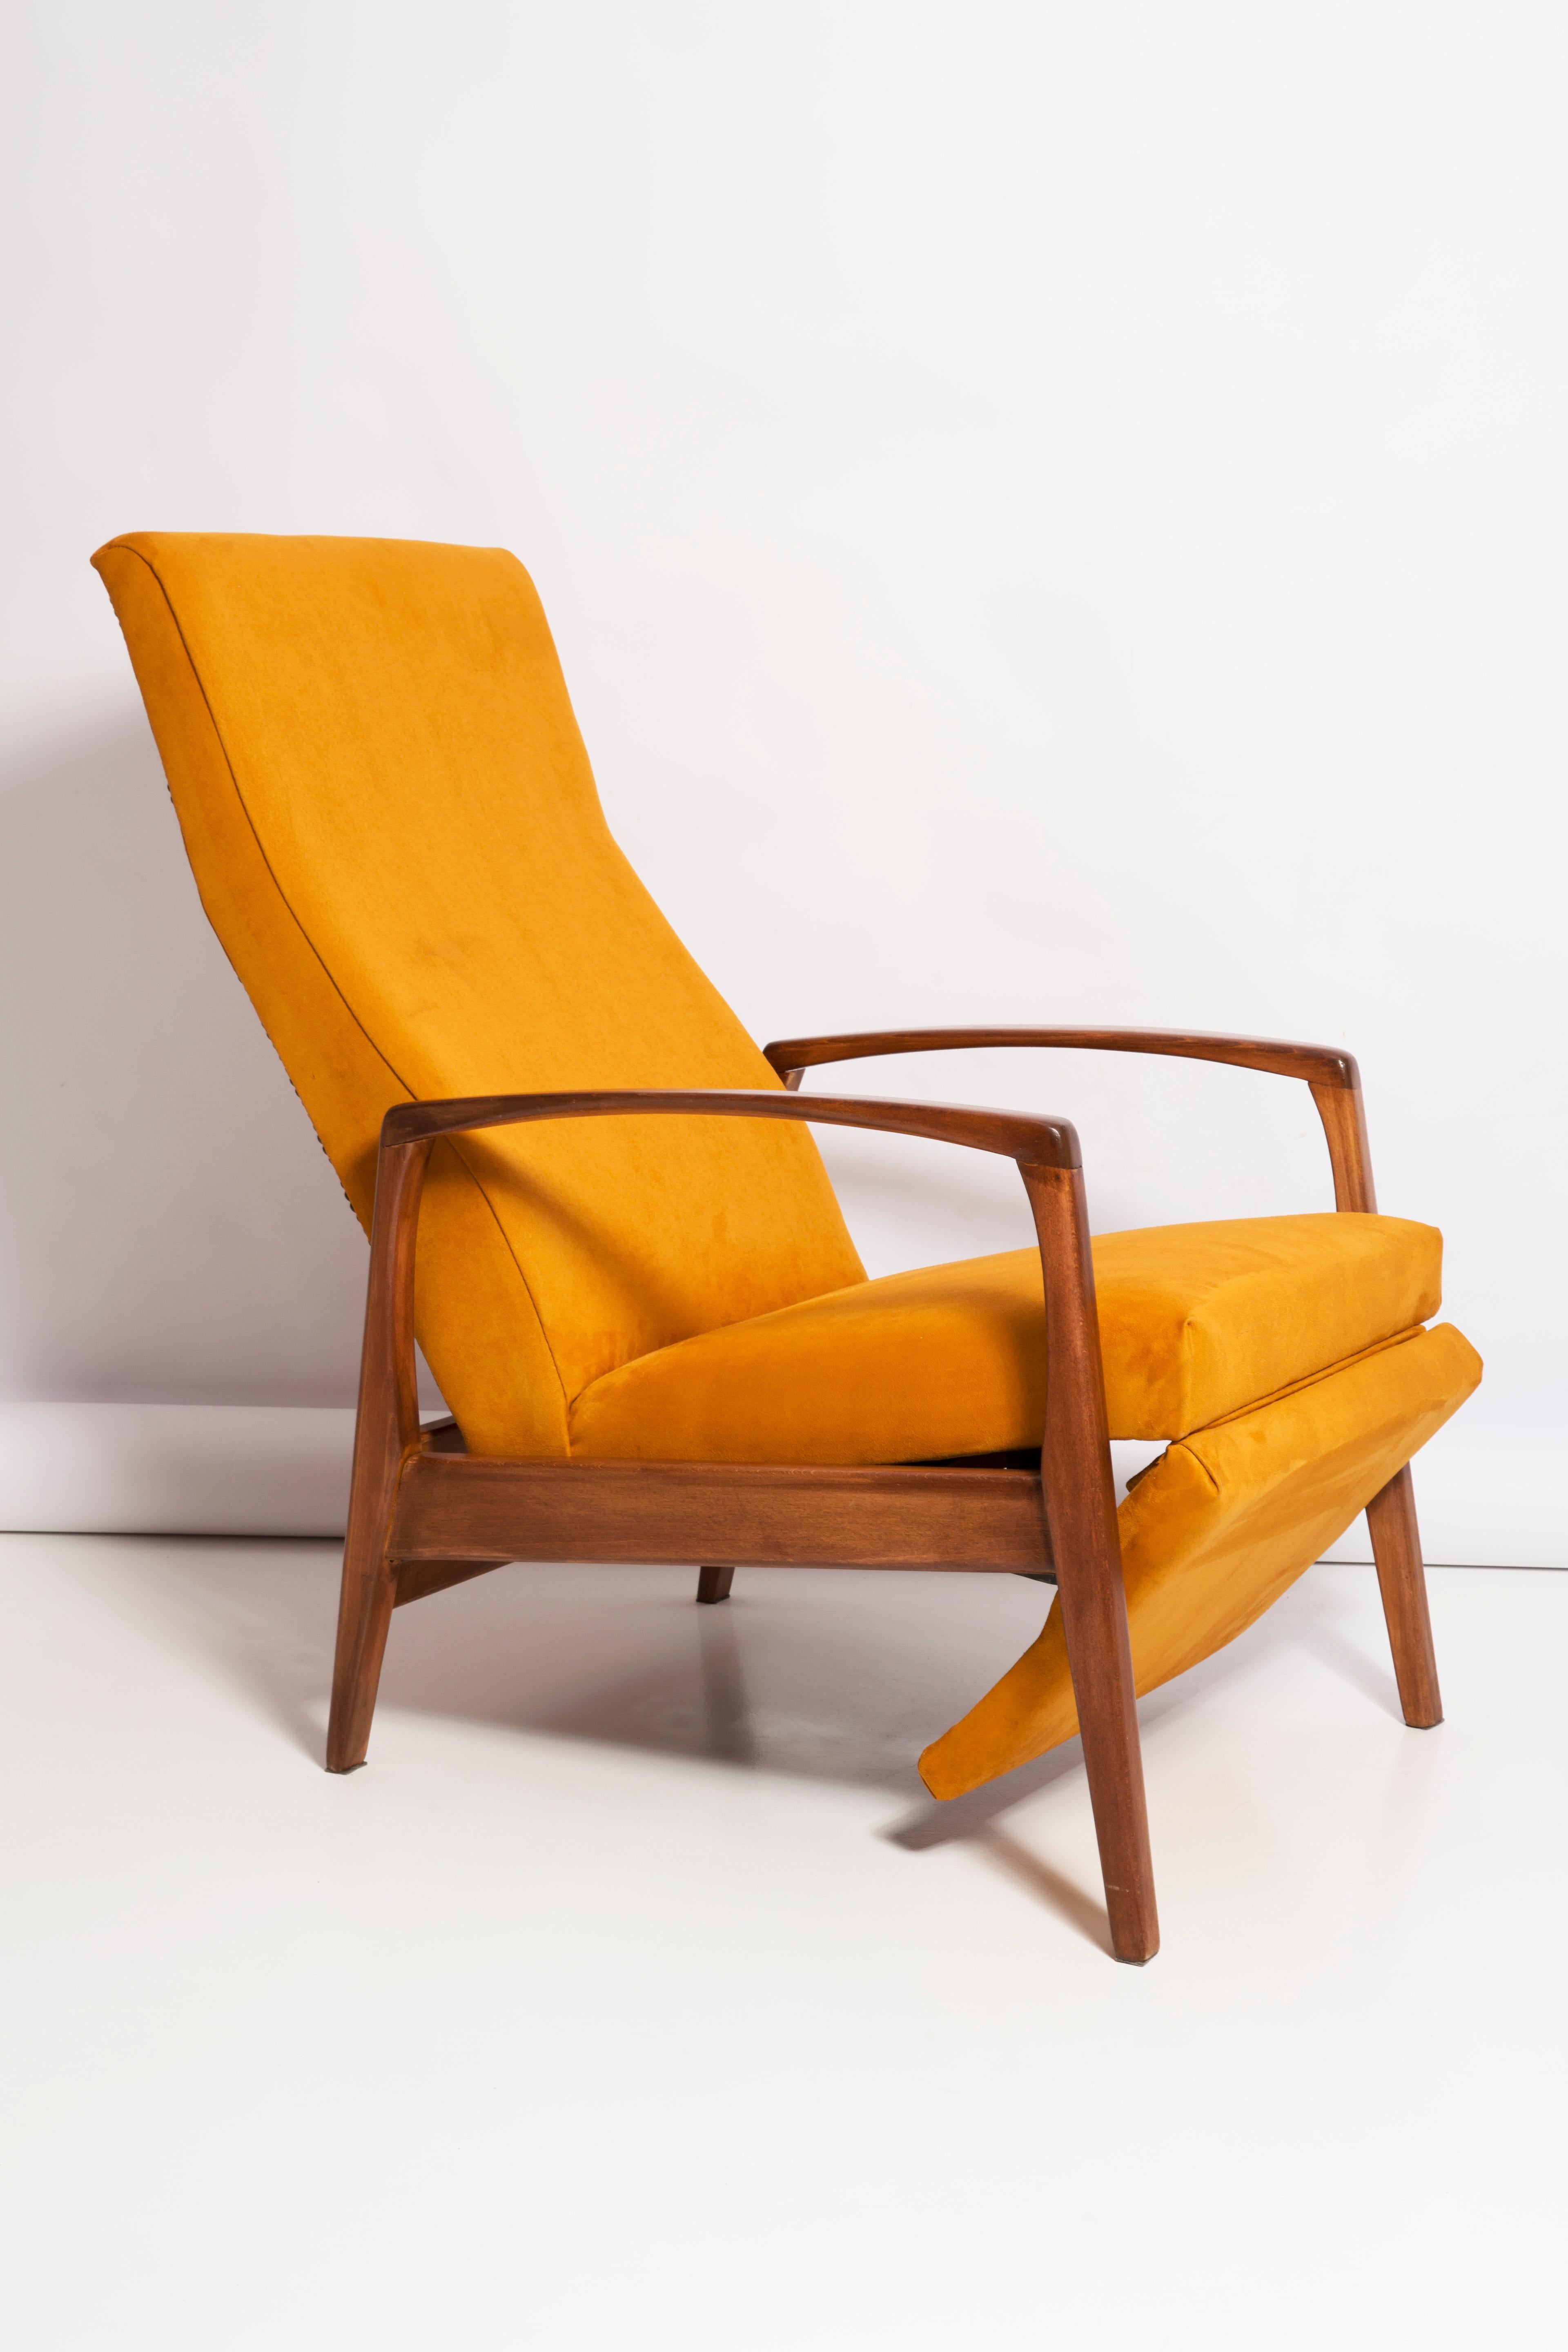 Very comfortable fold-out armchair, unusual model but captivating with its minimalism. Construction with armrests, turned legs made of beech wood.
Original mechanism of fold-out option works good. 

 These armchairs were manufactured in the 1960s